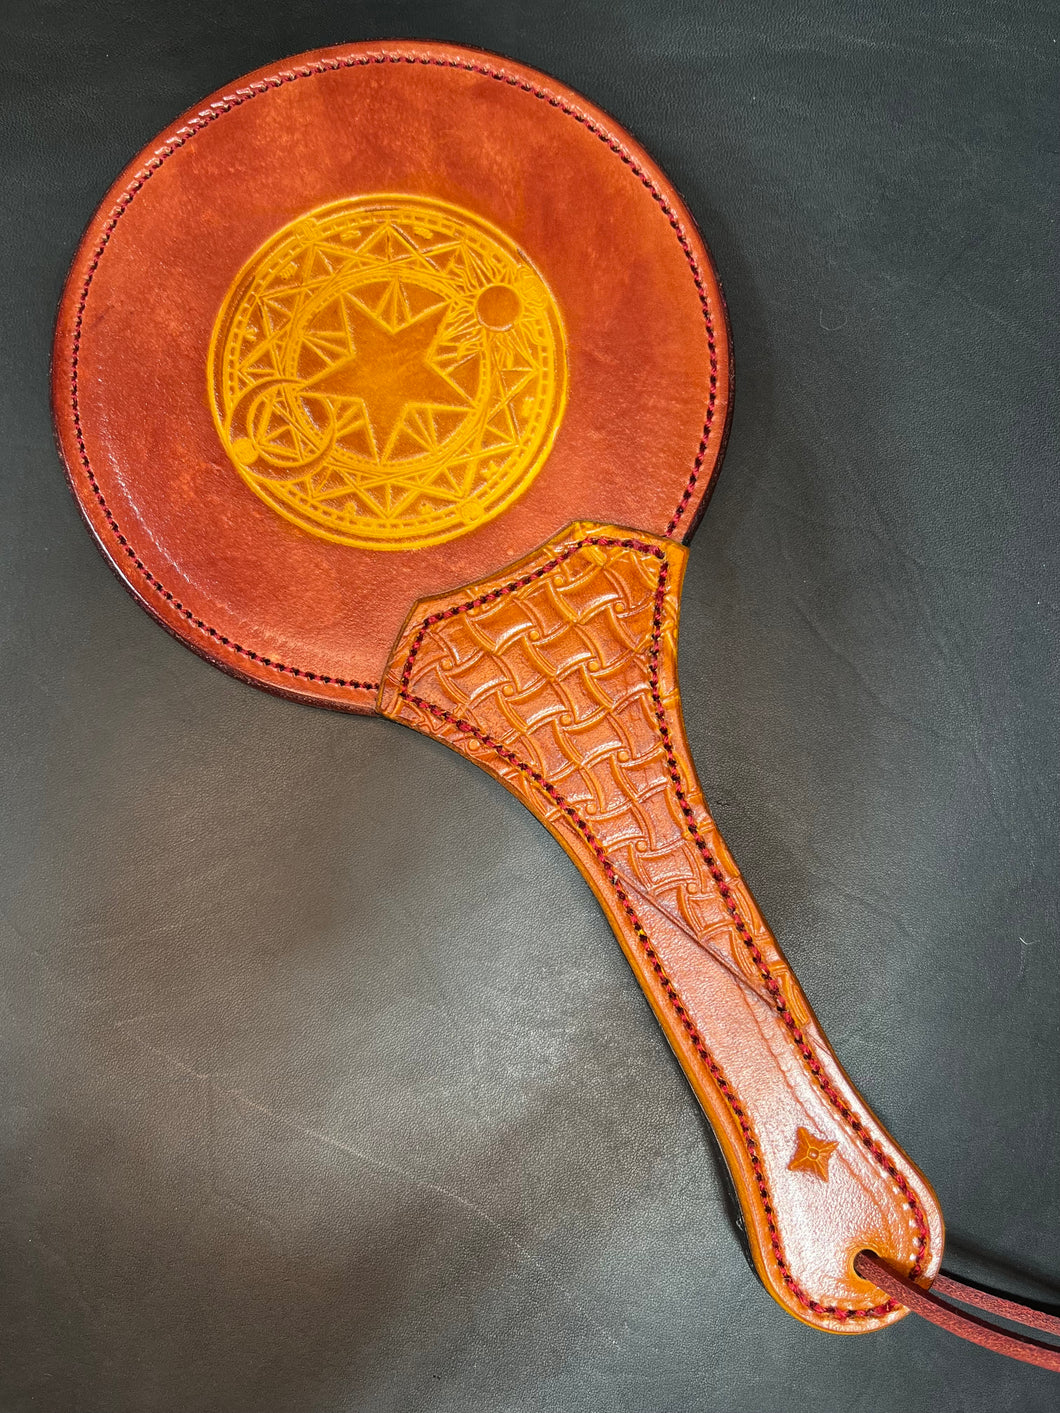 Leather Paddle: Lollipop Style Golden Brown & Black with Astrological Motif